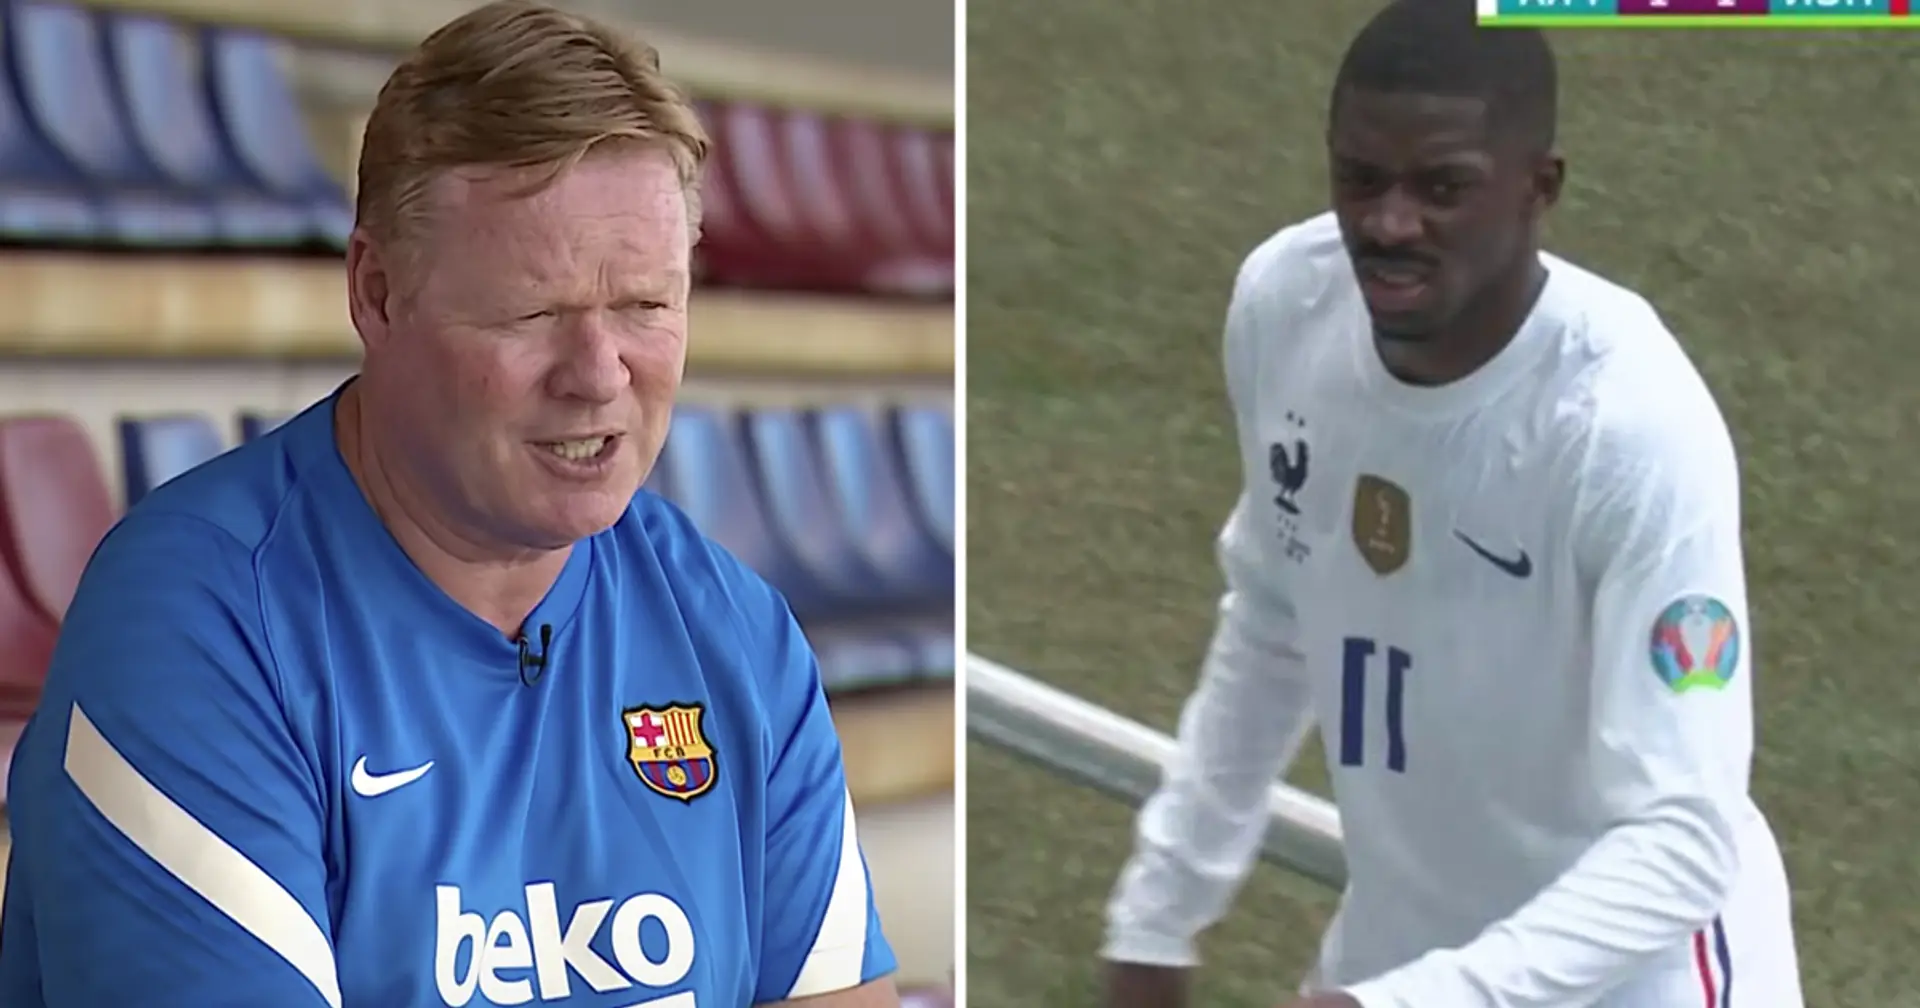 'It's a pity for him and for us': Koeman breaks silence on Dembele's contract situation